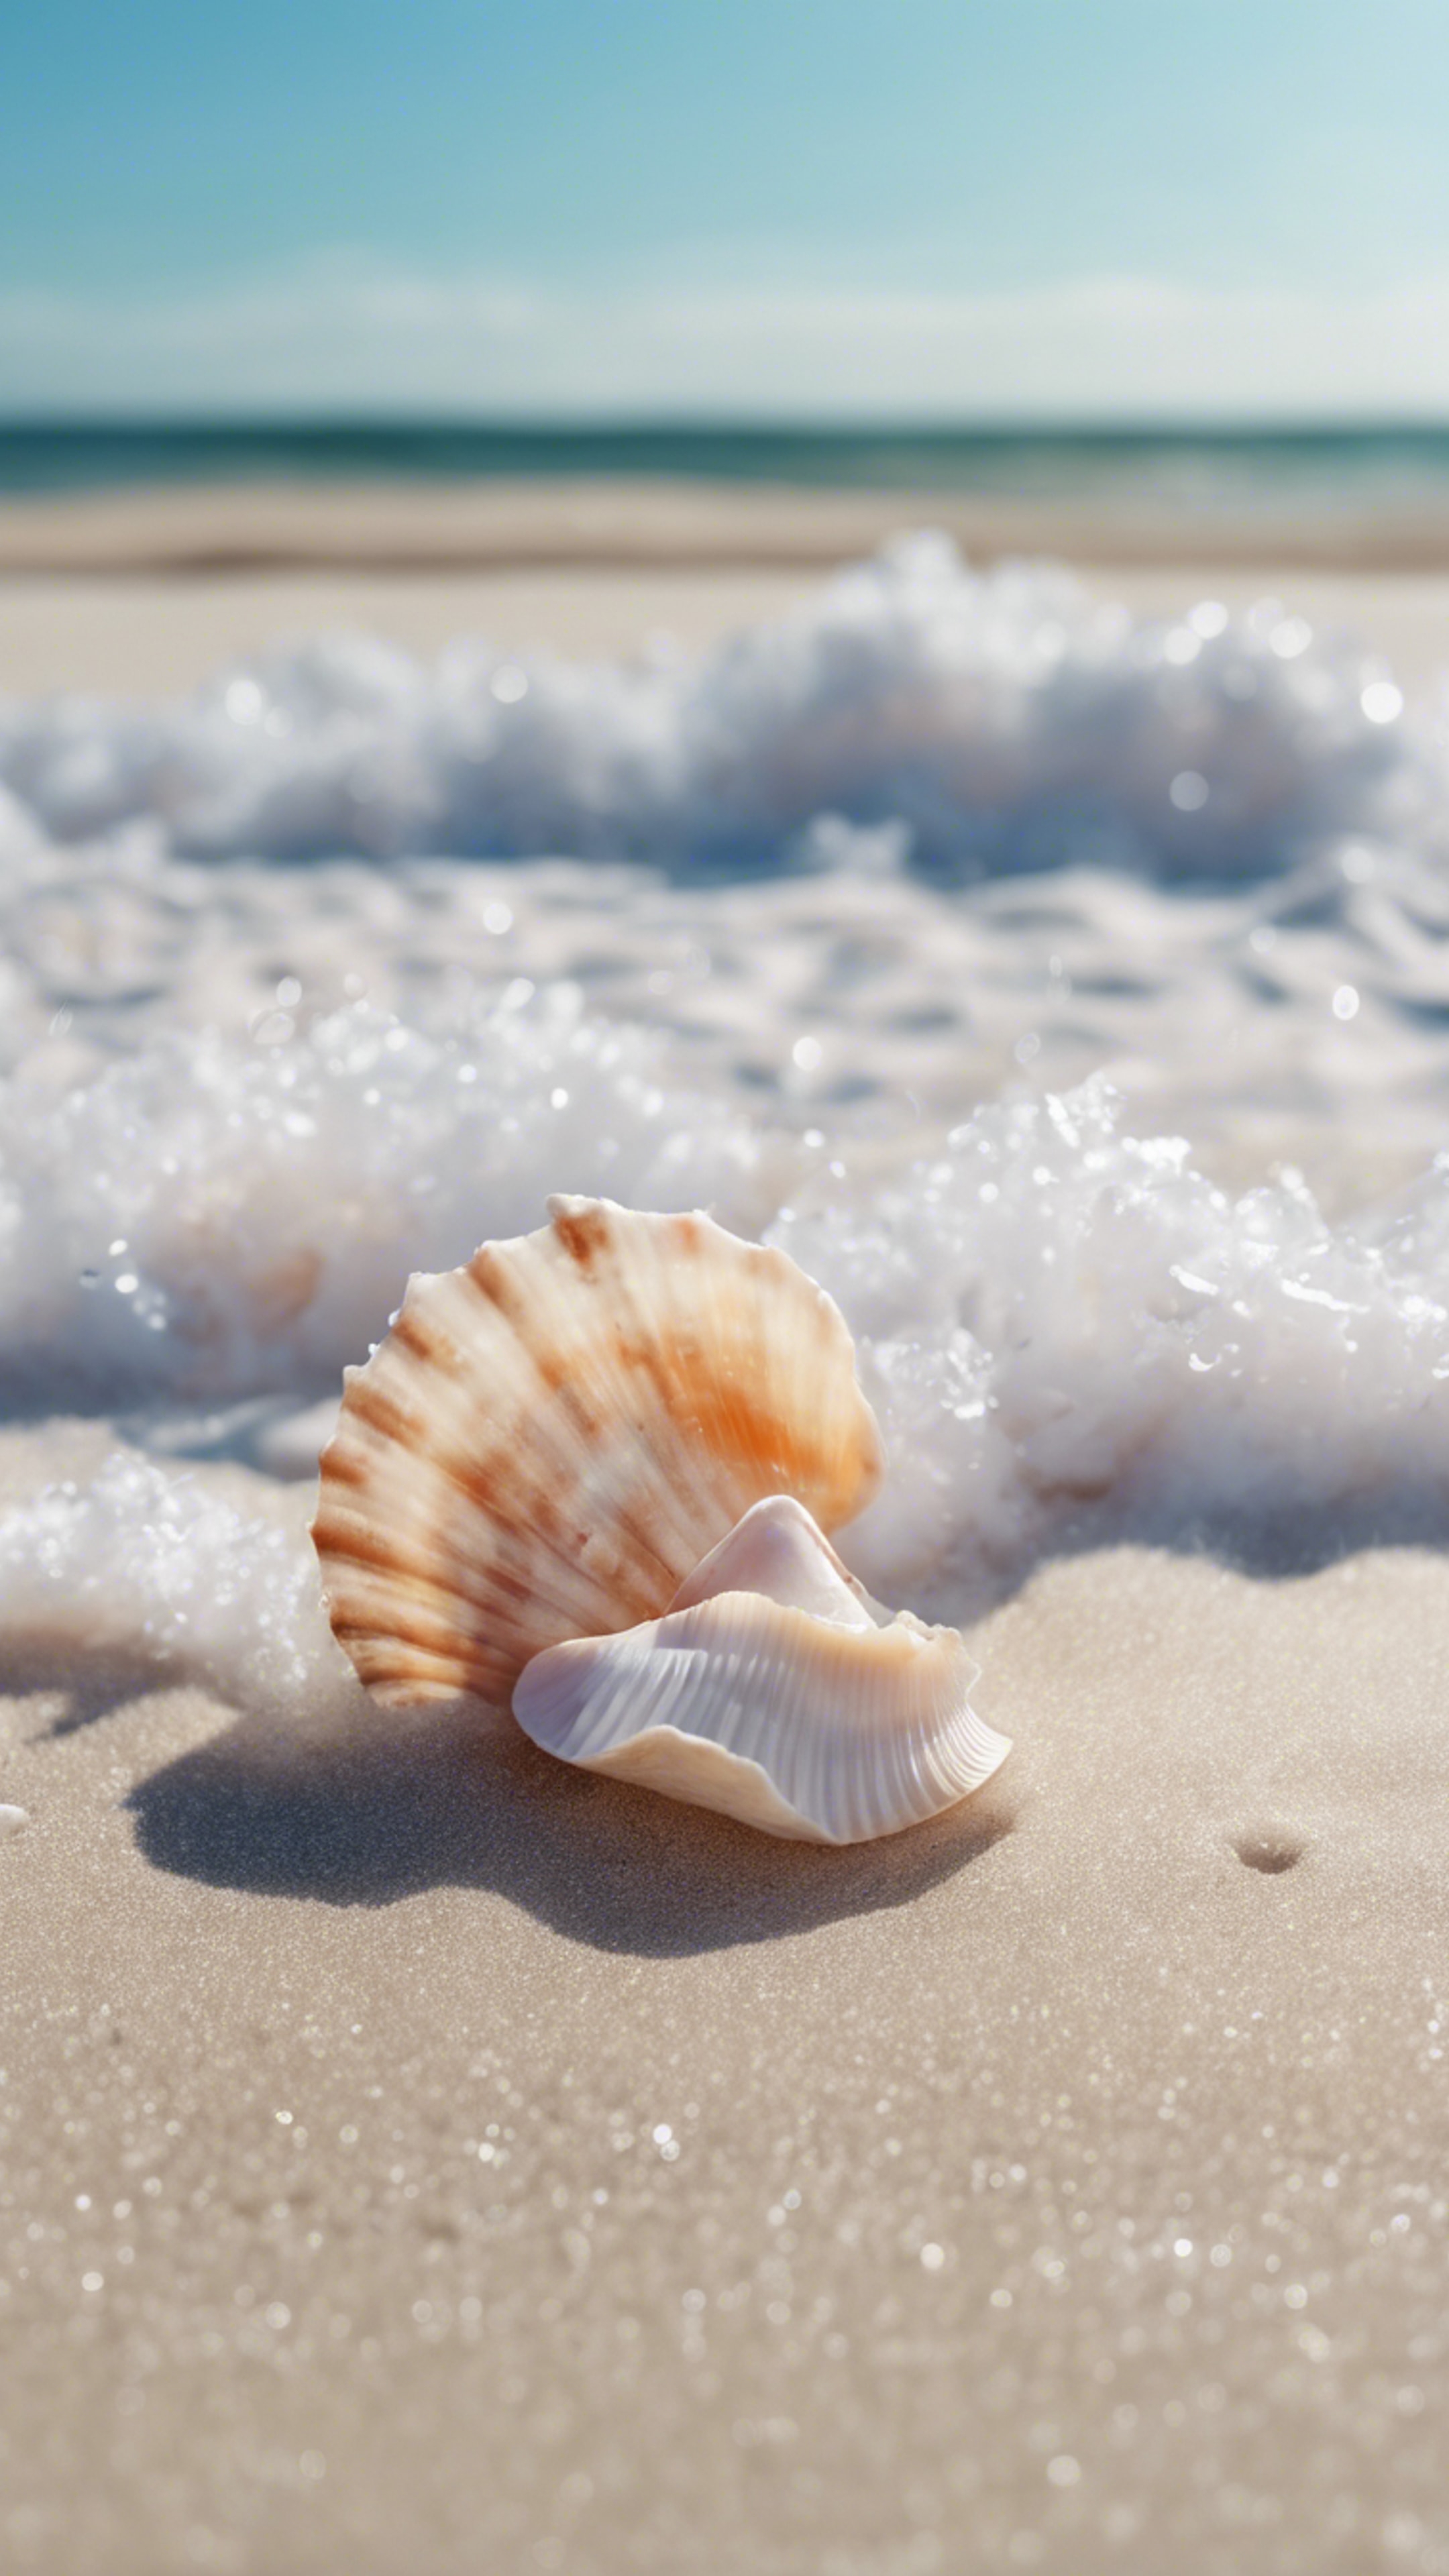 A wave washing ashore under a pastel blue sky, seashells scattered in white sand. Tapeta[00bc1dd8280e4c80977e]